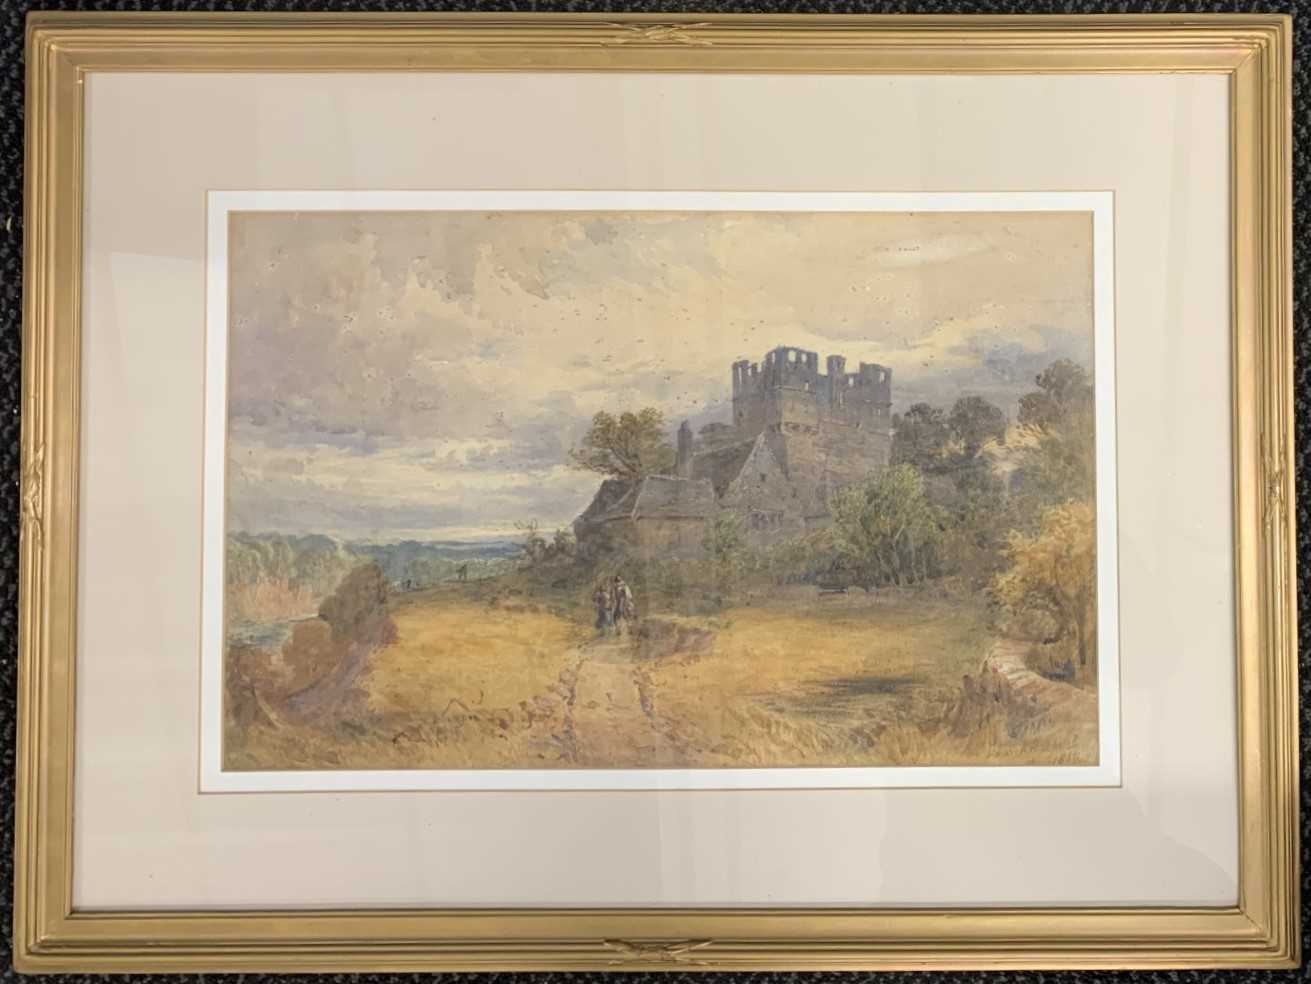 Henry A. Harper (British, 1835-1900), Castle ruin and buildings on a cliff edge with two - Image 2 of 2